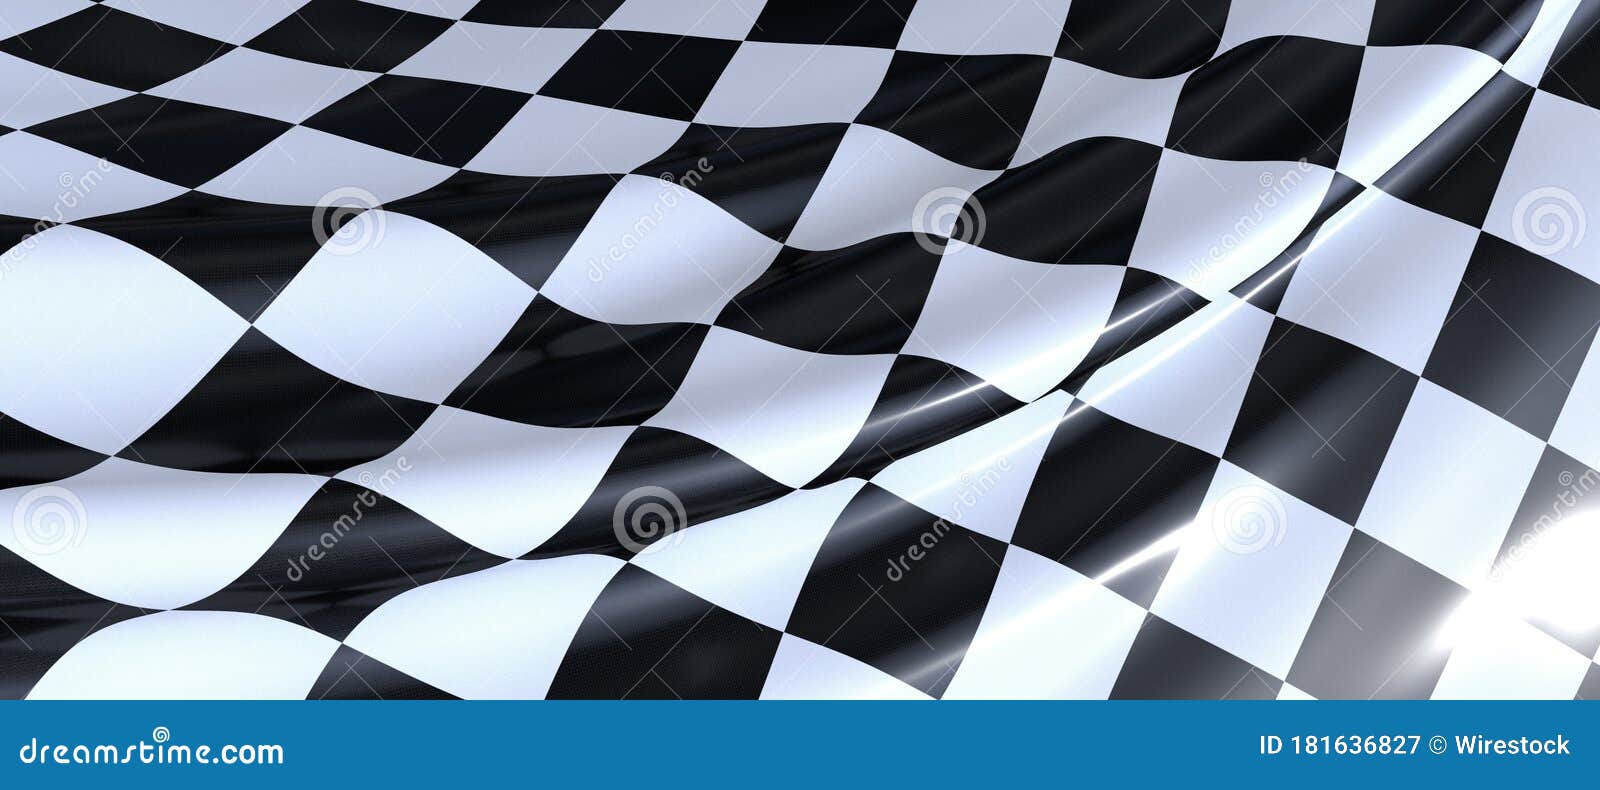 Closeup Of A Wavy Checkered Flag Under The Lights - Perfect For ... Repeating Checkered Flag Background